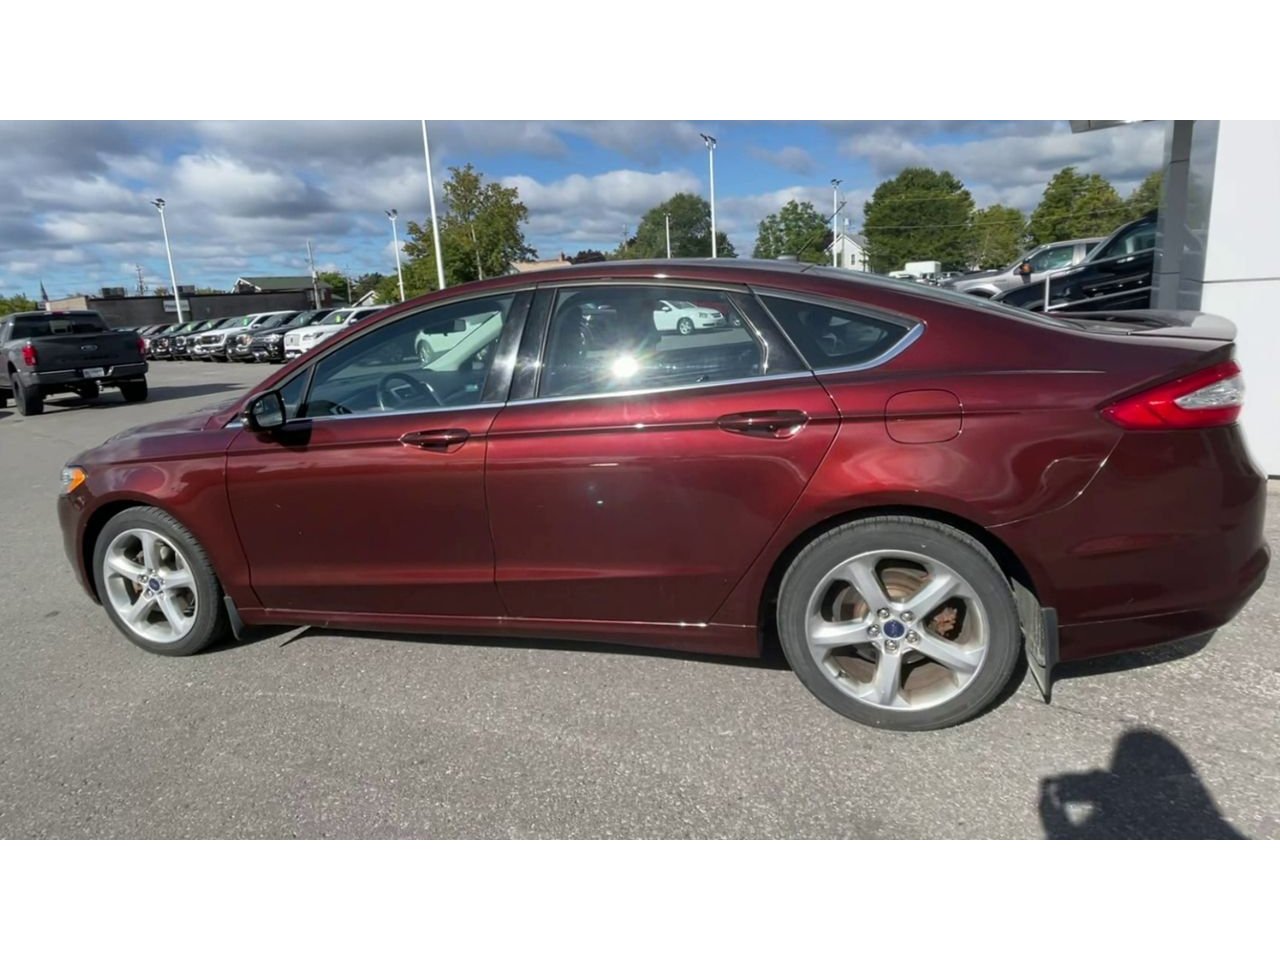 2016 Ford Fusion - P21337 Full Image 6